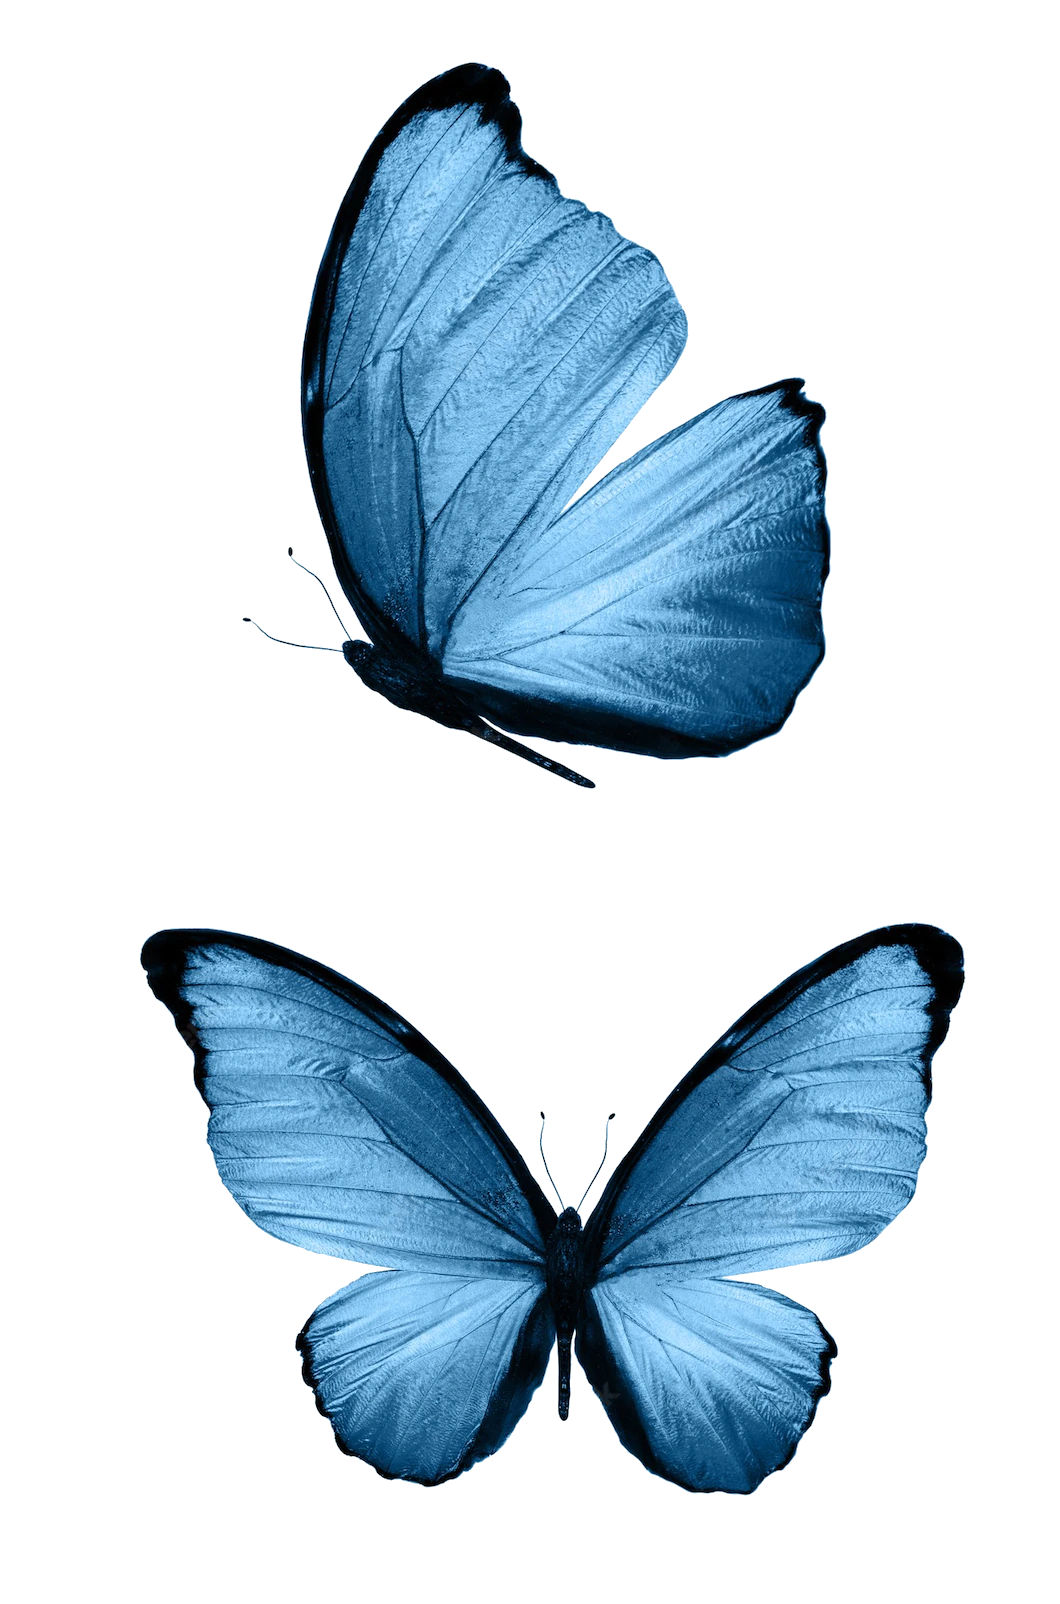 butterfly-png-image-pngfre-73